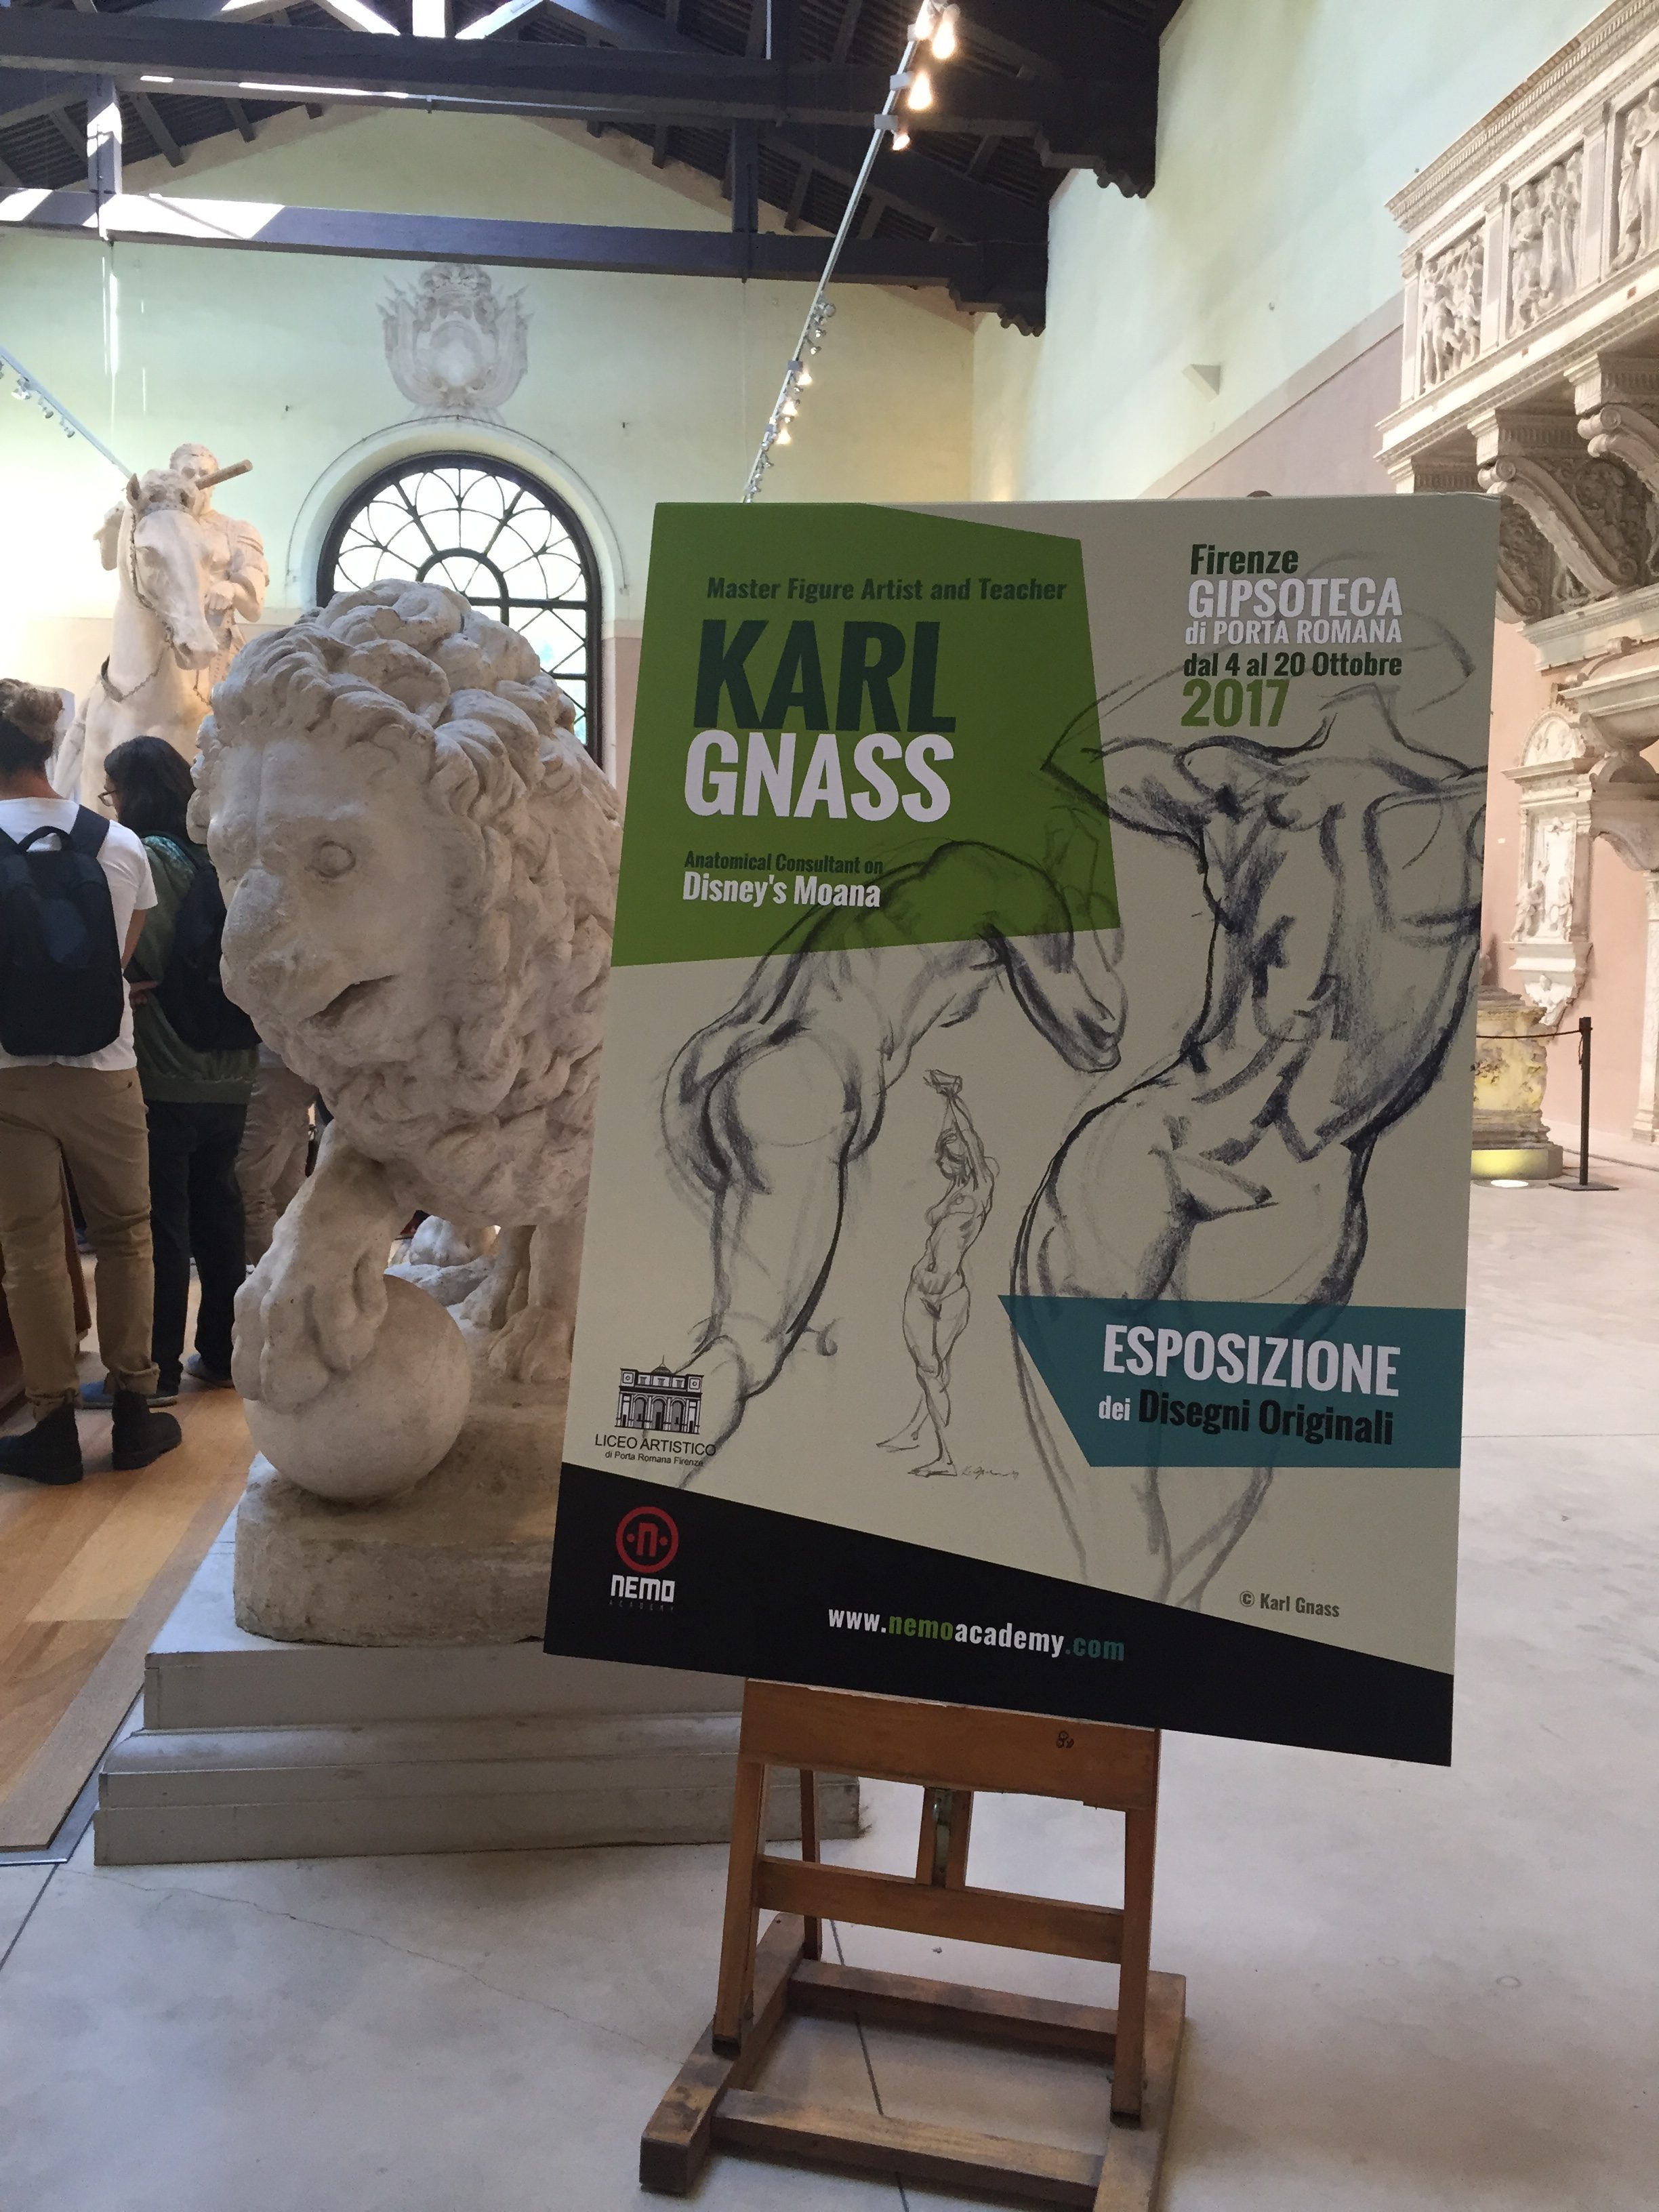 Karl's Art Exhibit at the Gipsoteca dell'Istituto d'Arte di Firenze Museum - Florence, Italy